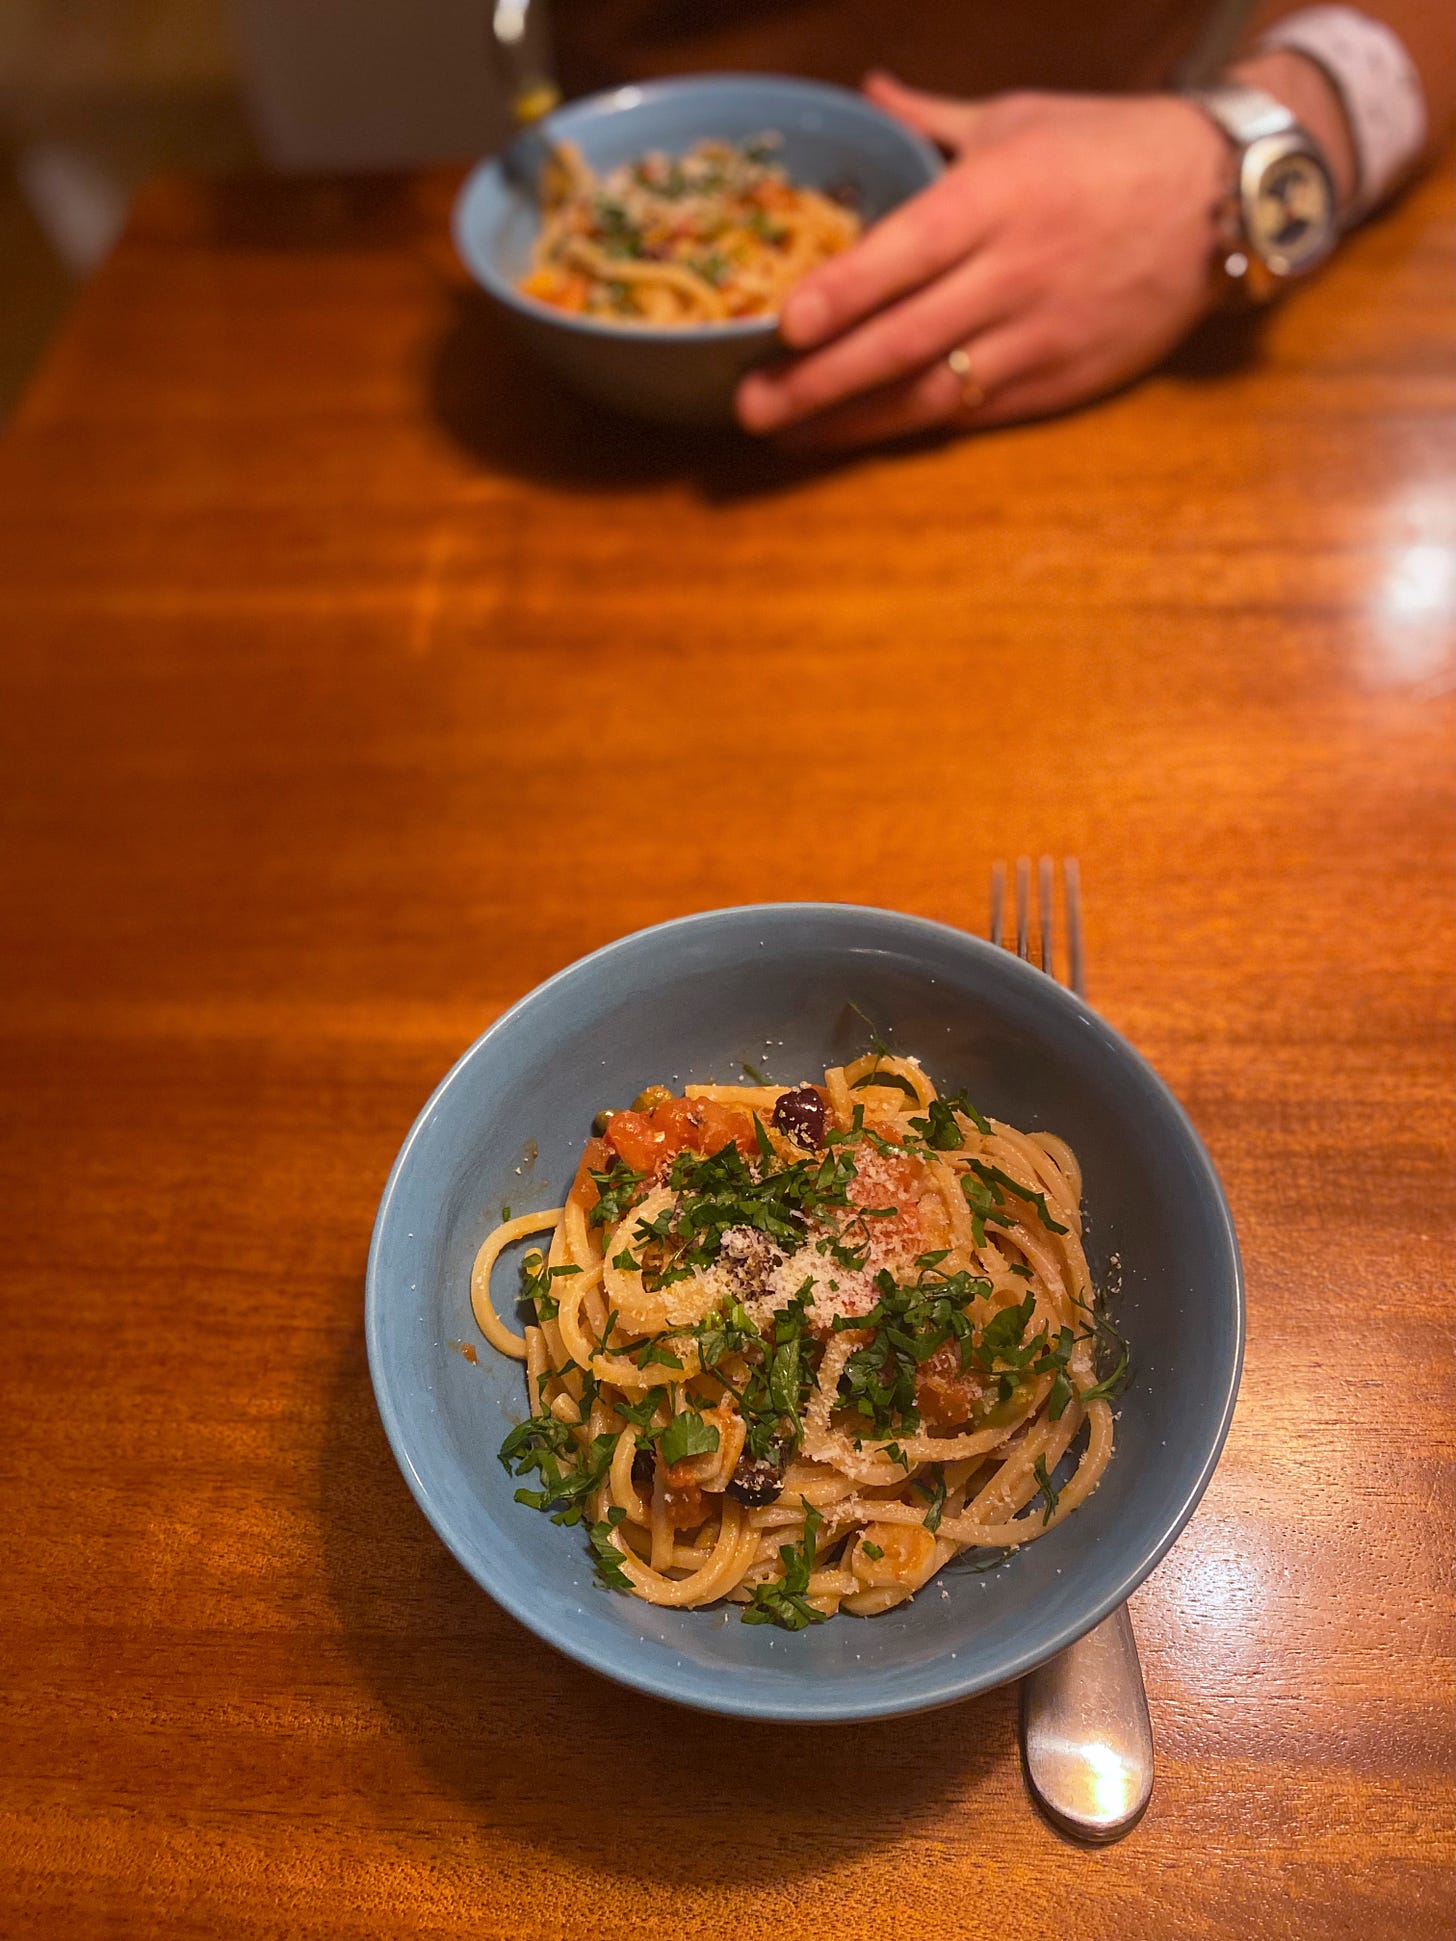 Two blue bowls of pasta across from each other on the table. Each is dusted with parmesan and a sprinkling of chopped parsley. Jeff's hand is curled around his bowl on the far side of the table, fork hovering above his food.